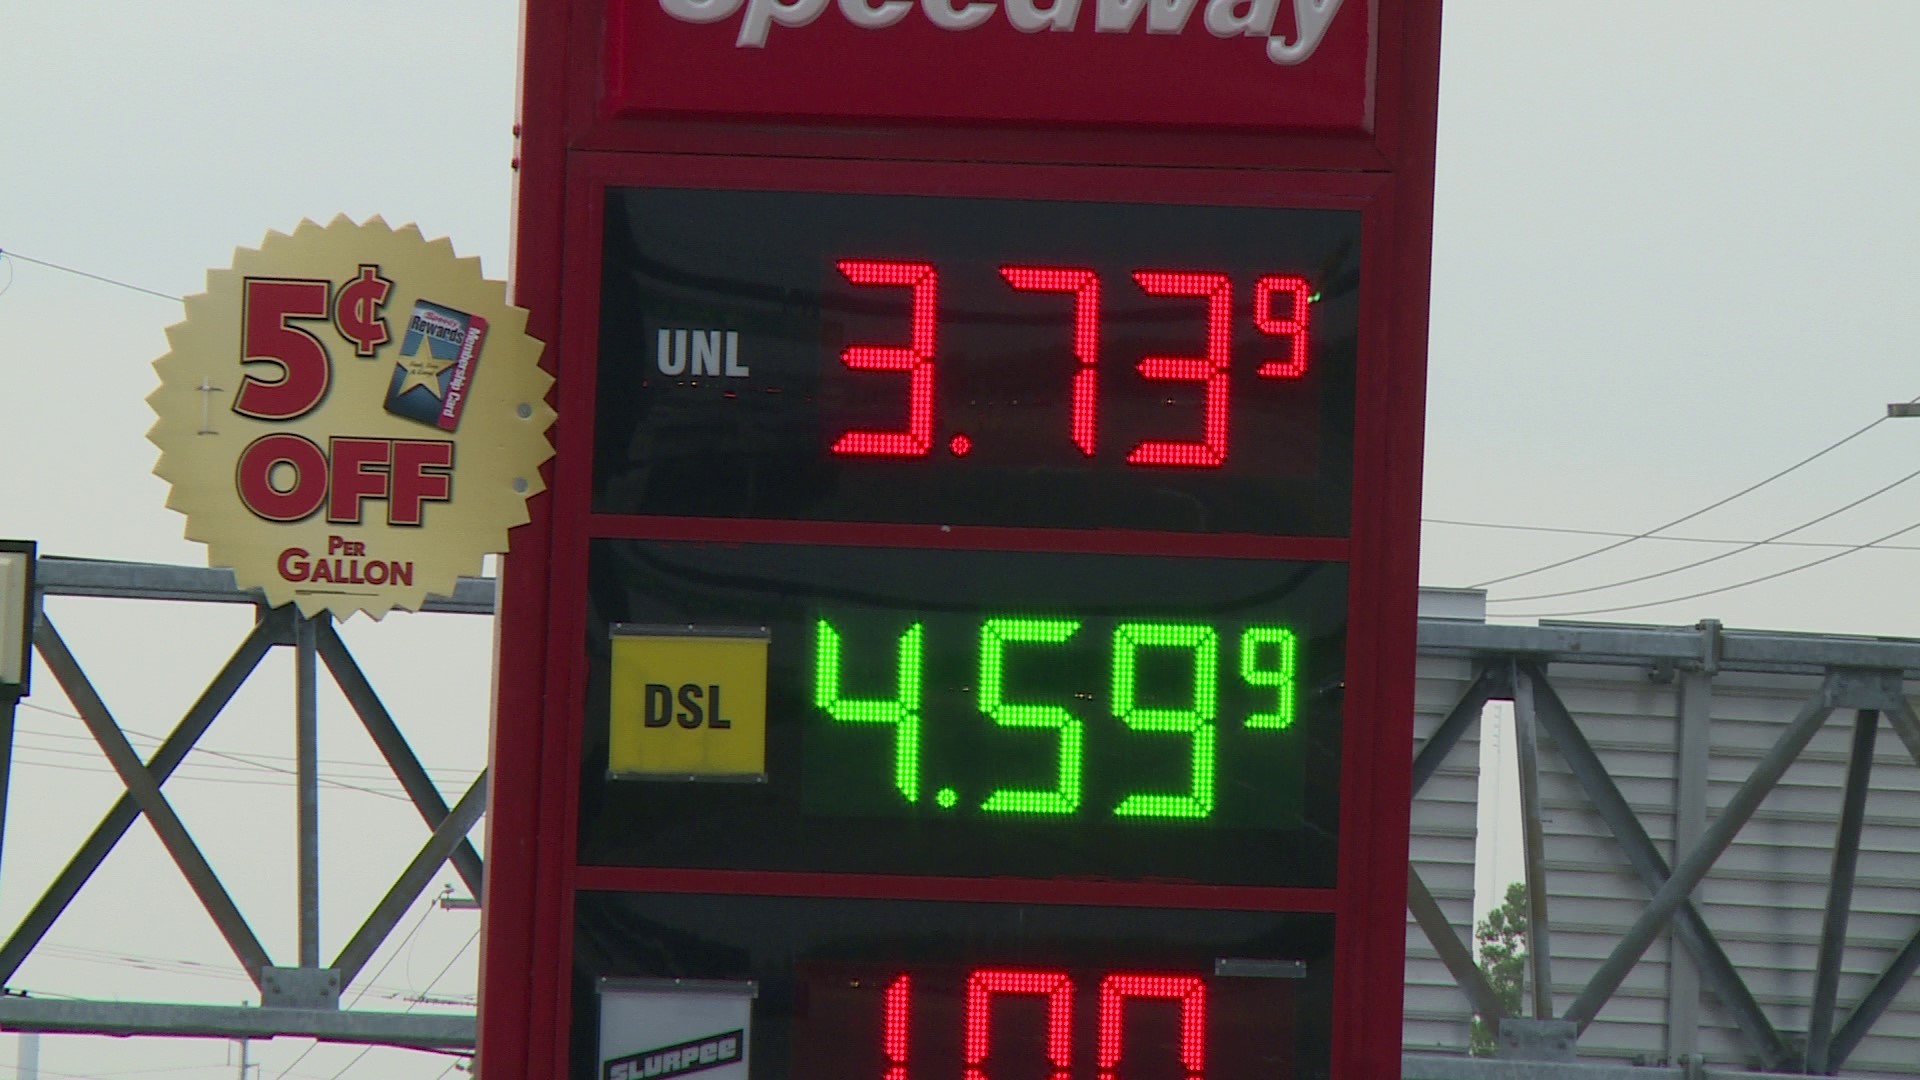 Patrick DeHaan of GasBuddy.com says that the current trend towards lower gas prices could continue through the holiday weekend.